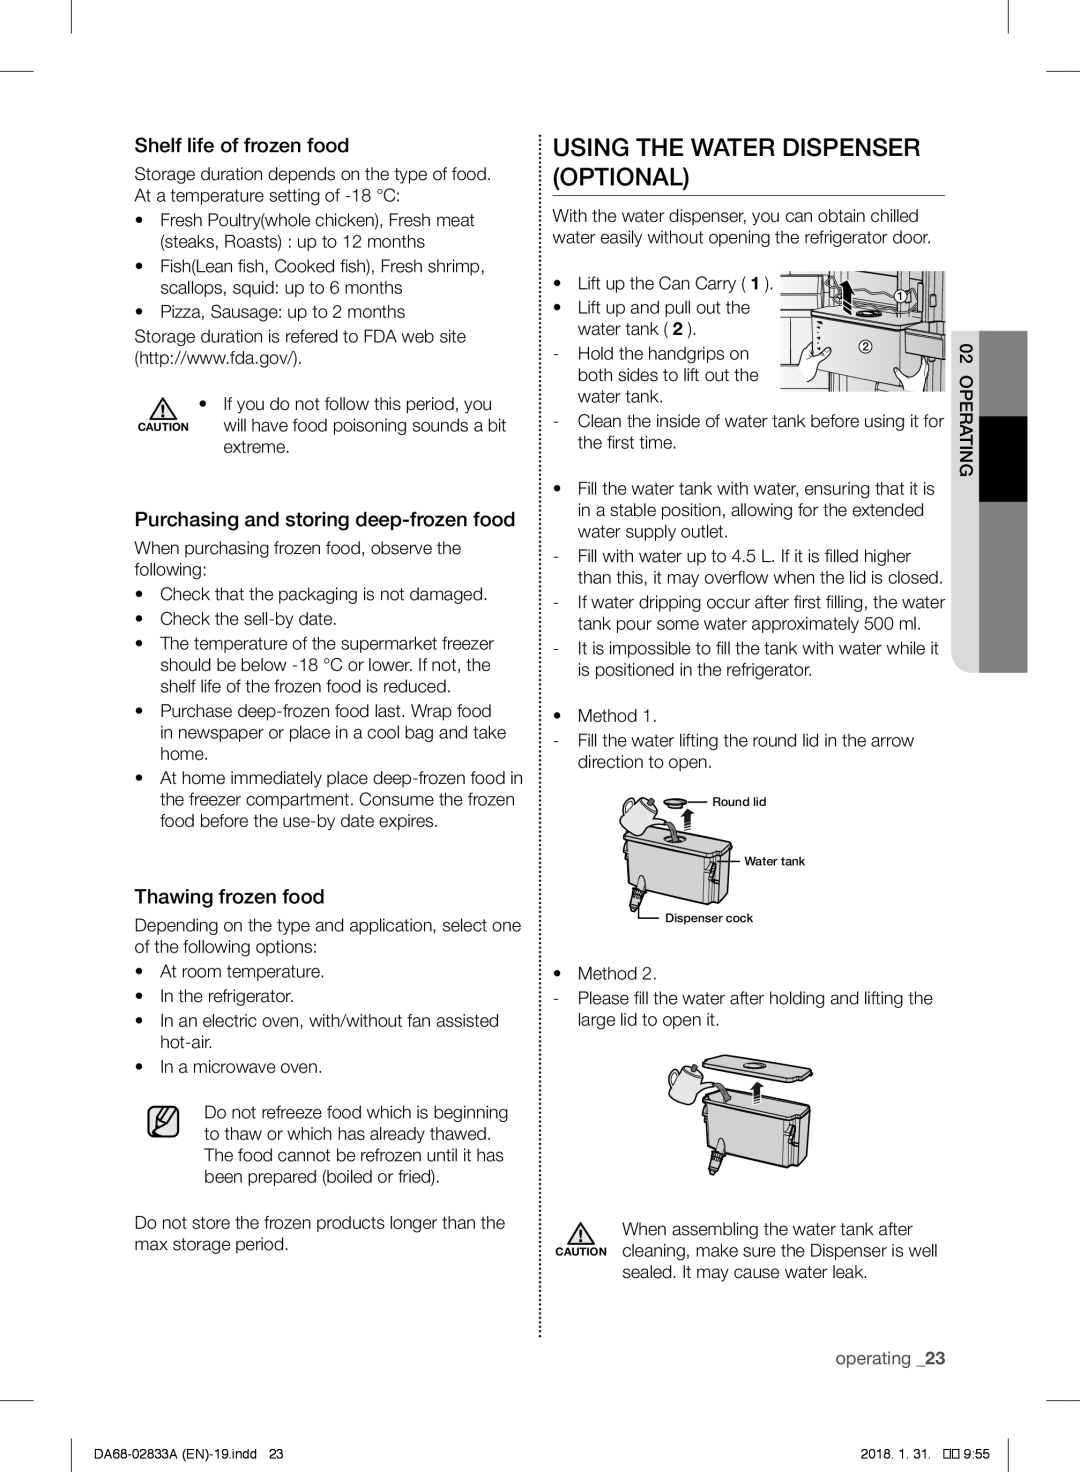 Samsung RB31HER2CSA/EF manual Using The Water Dispenser Optional, Shelf life of frozen food, Thawing frozen food, operating 